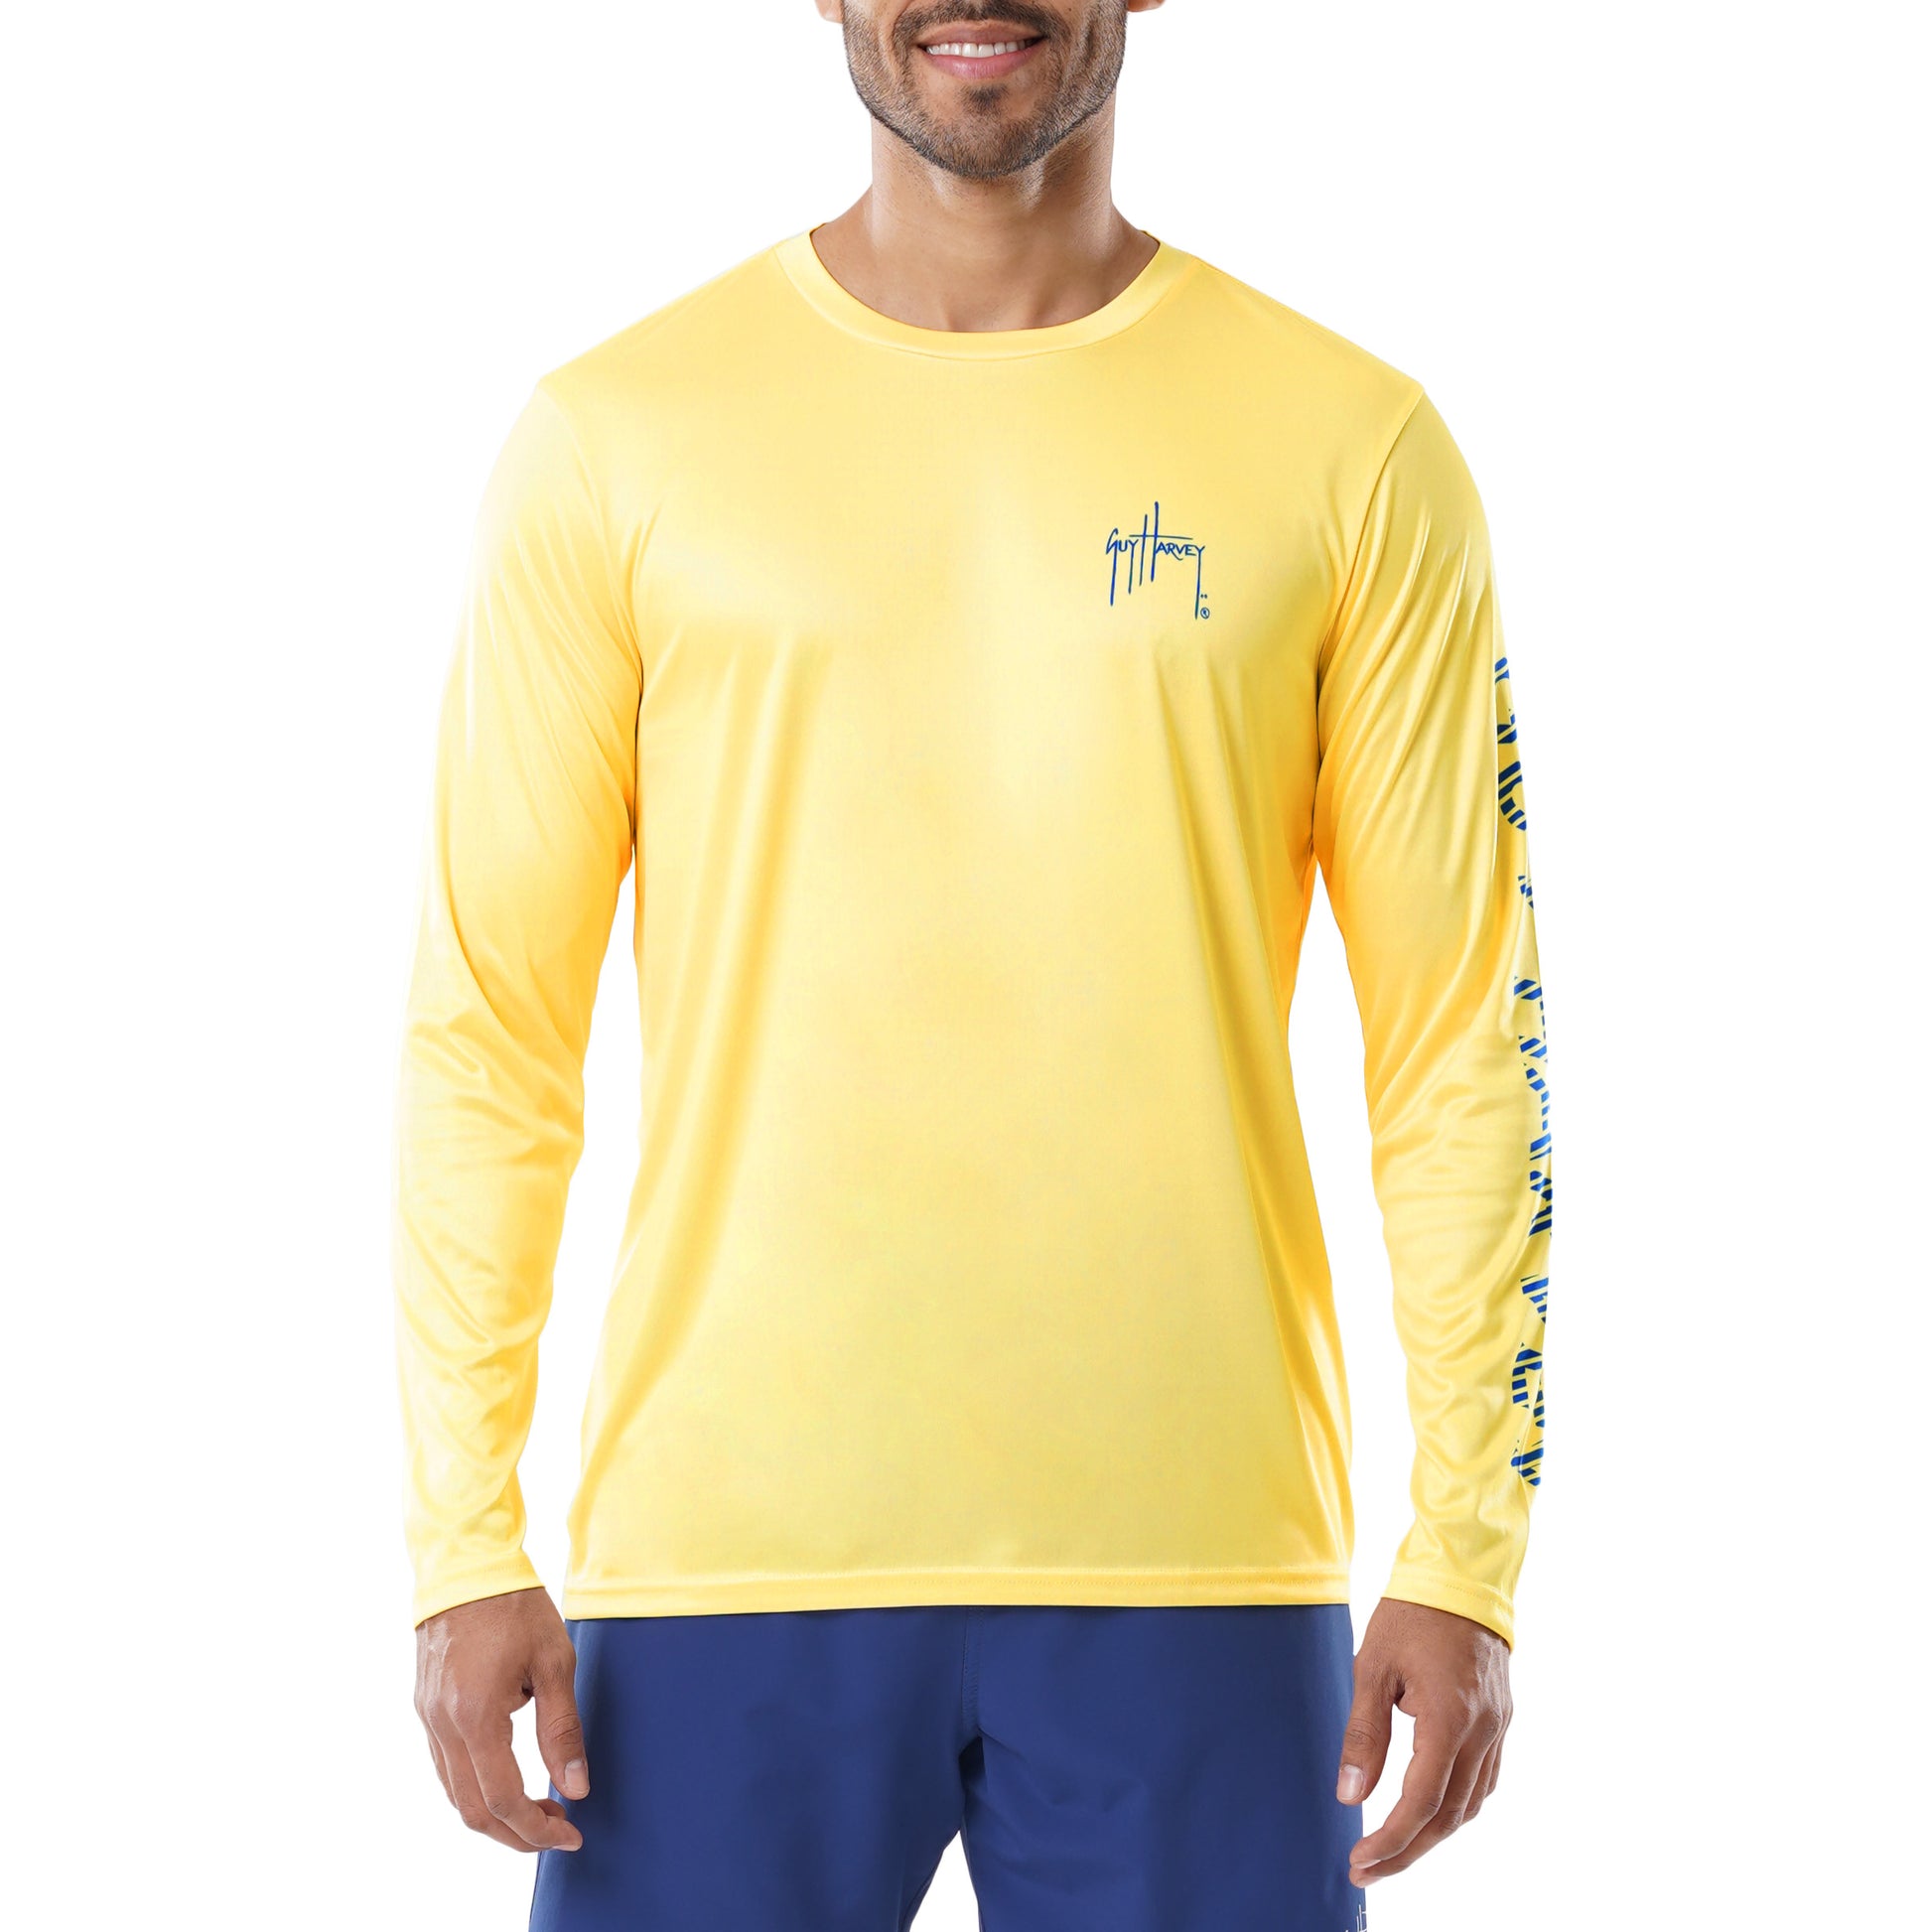 Guy Harvey | Men's The Art of Offshore Performance Sun Protection Top, Large